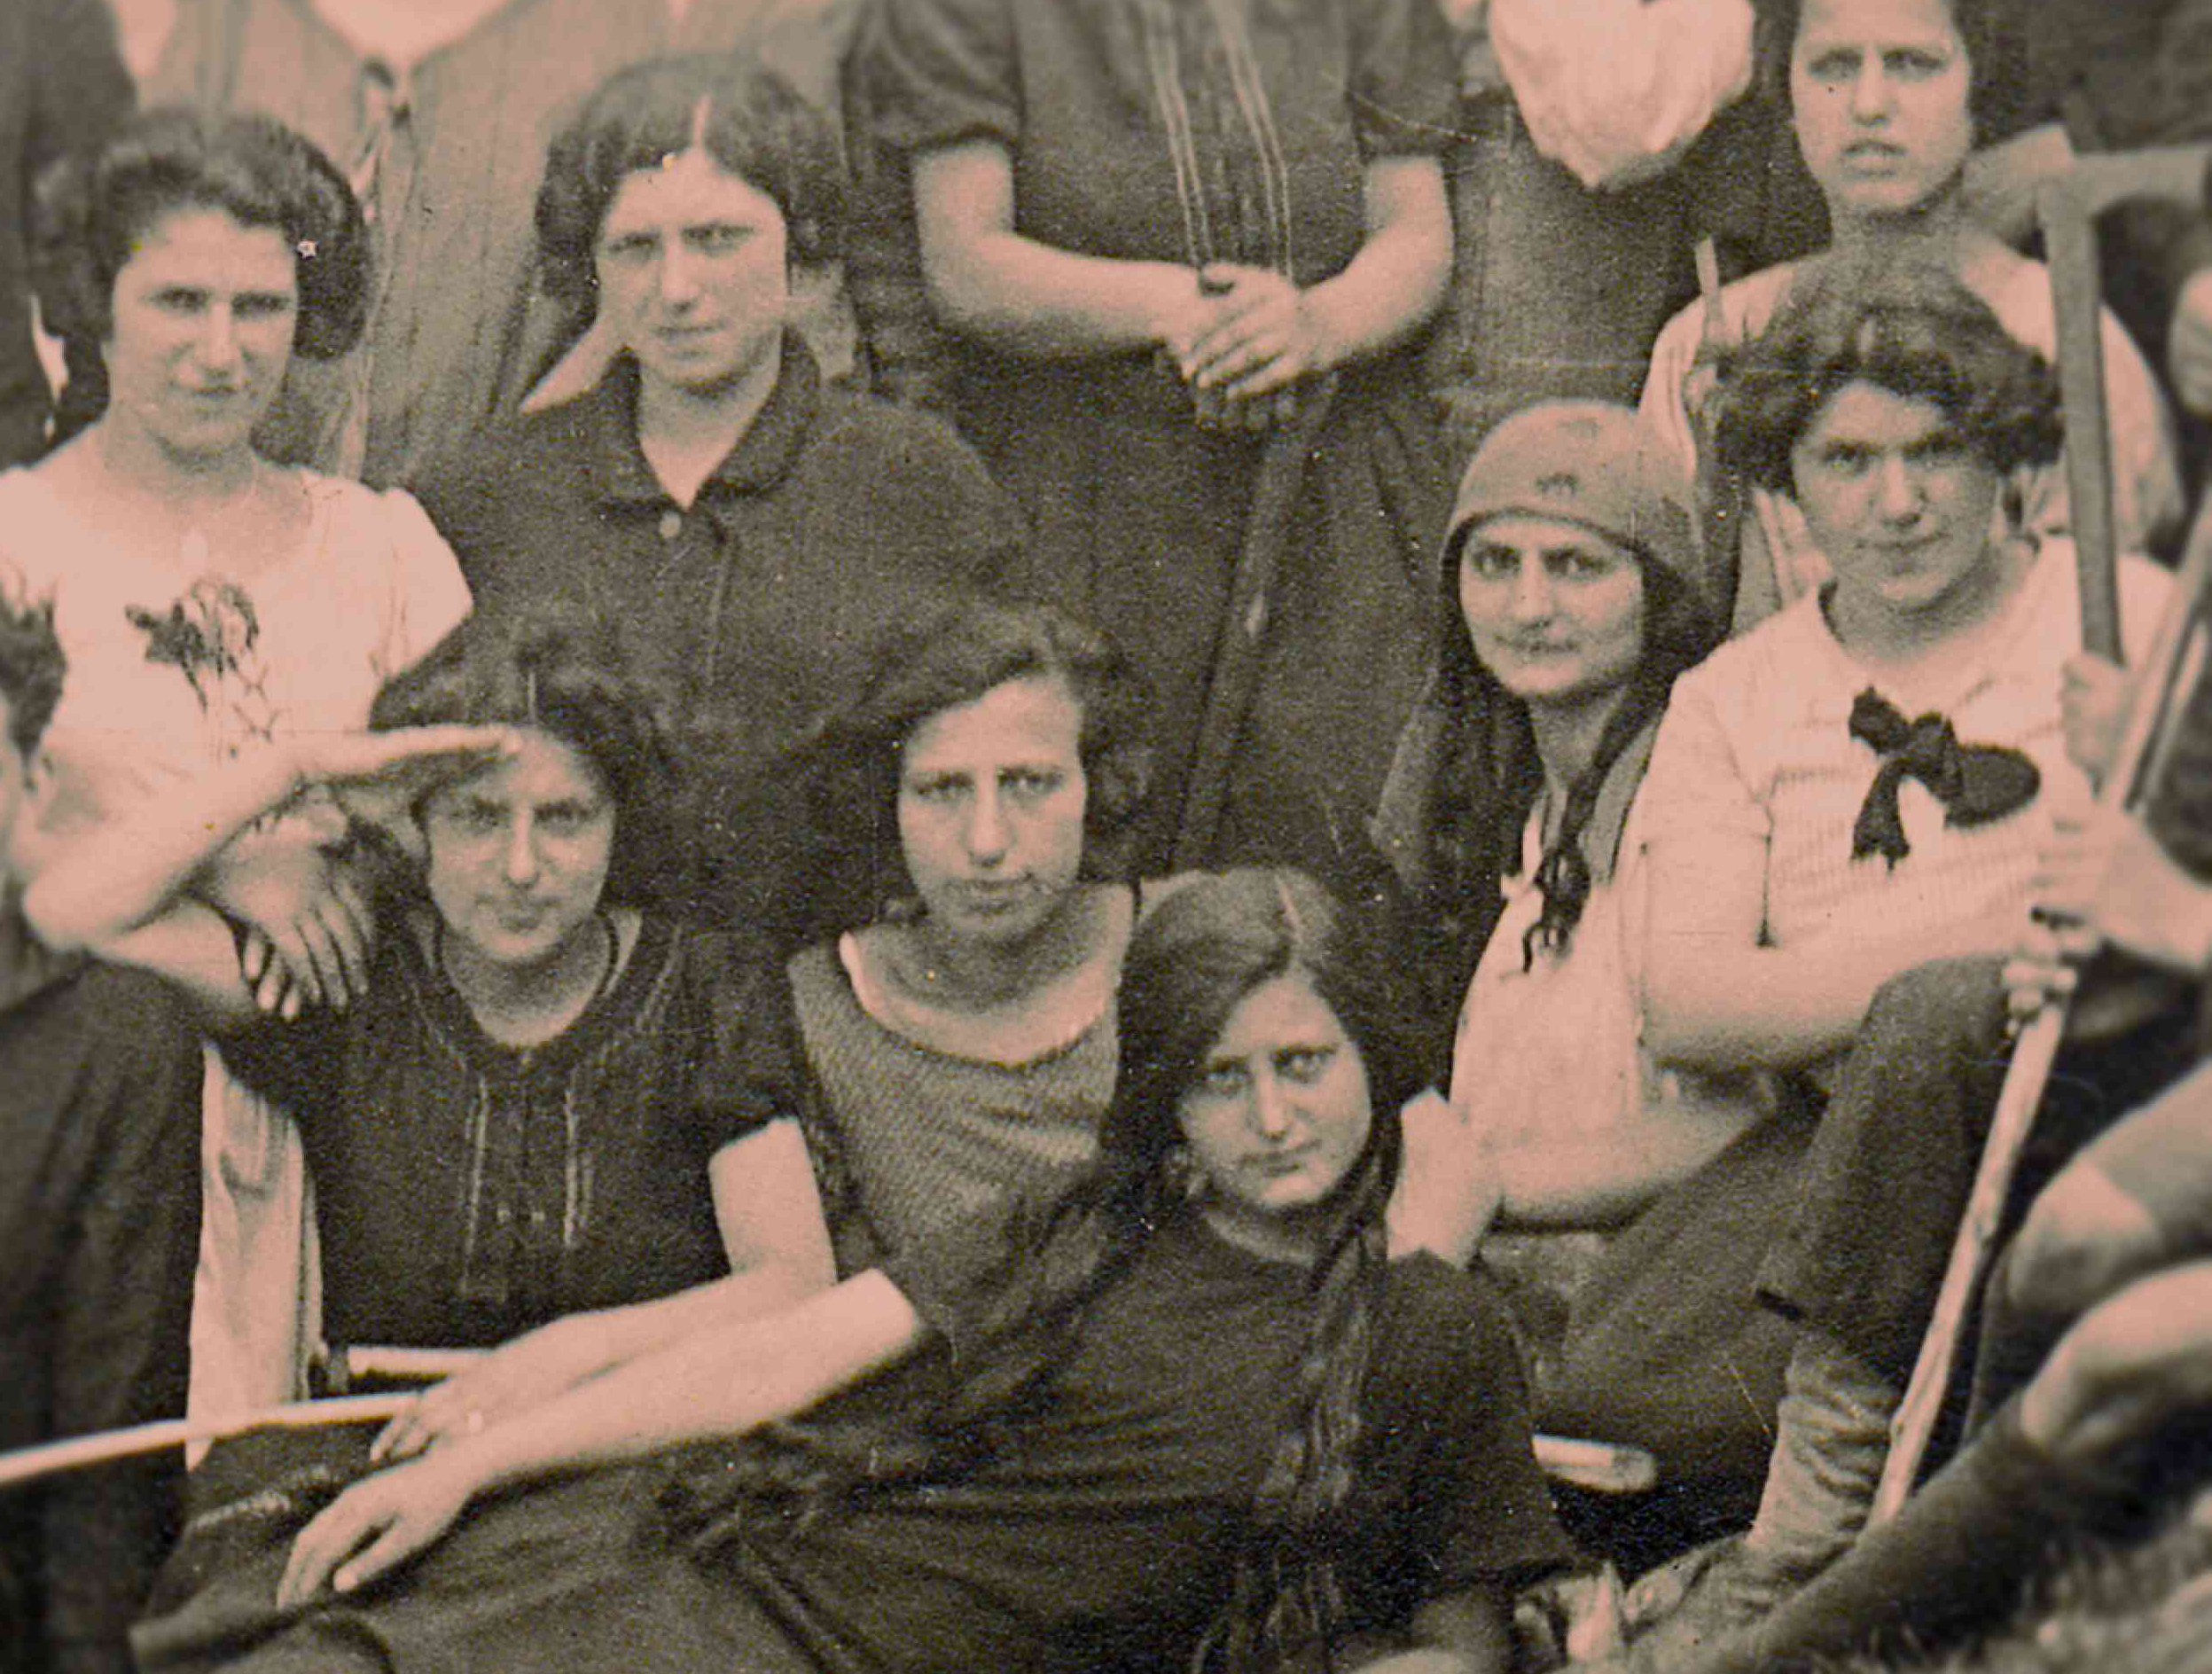 Jewish Anarchist Women of the Early 1900s: An Interview With Elaine Leeder